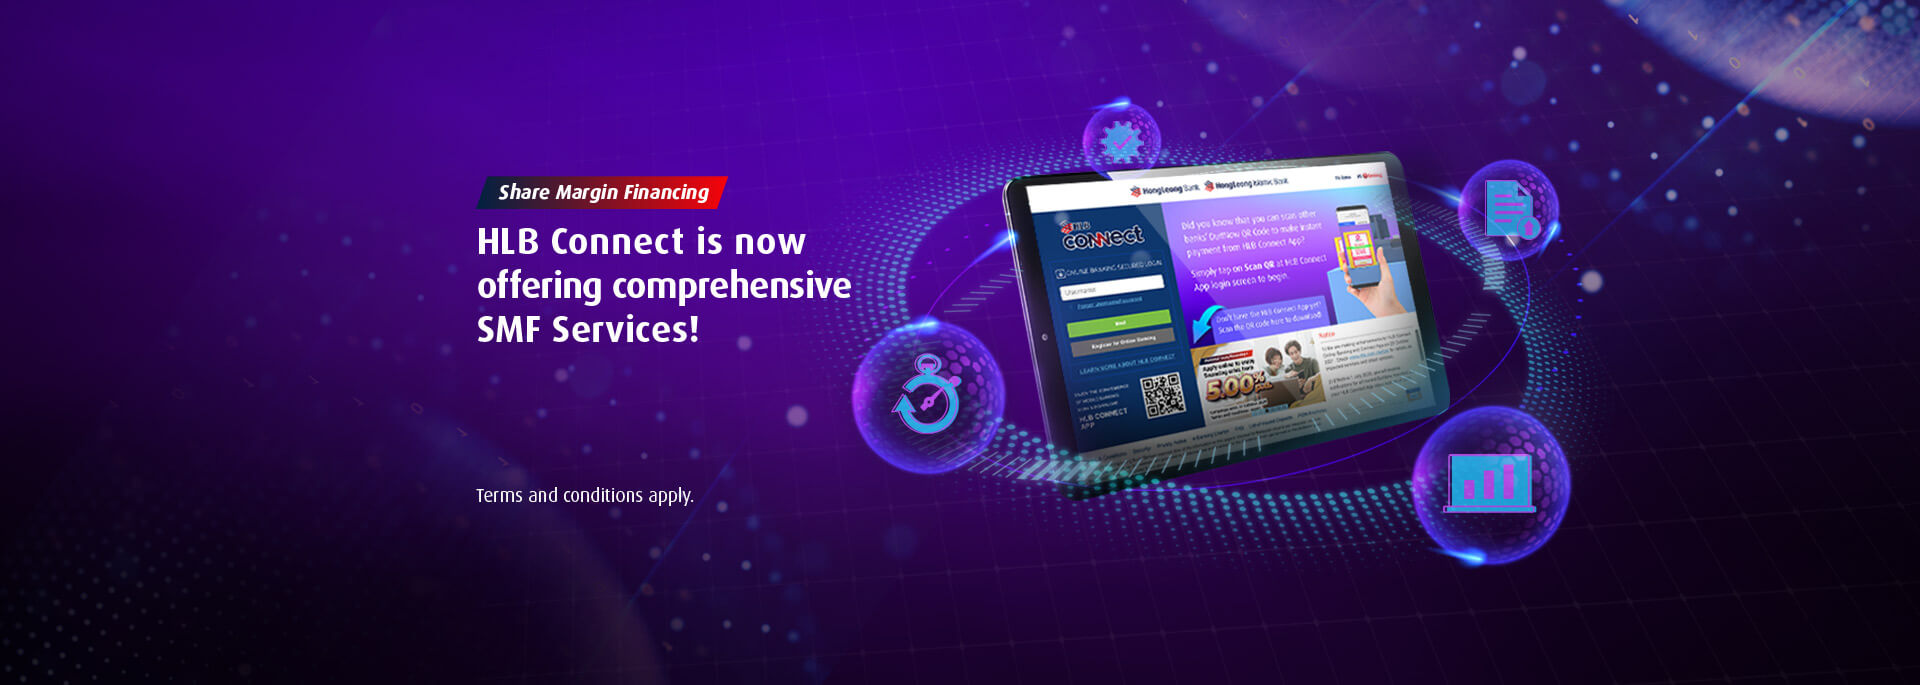 Perform your SMF Services with convenience via HLB Connect Online Banking!